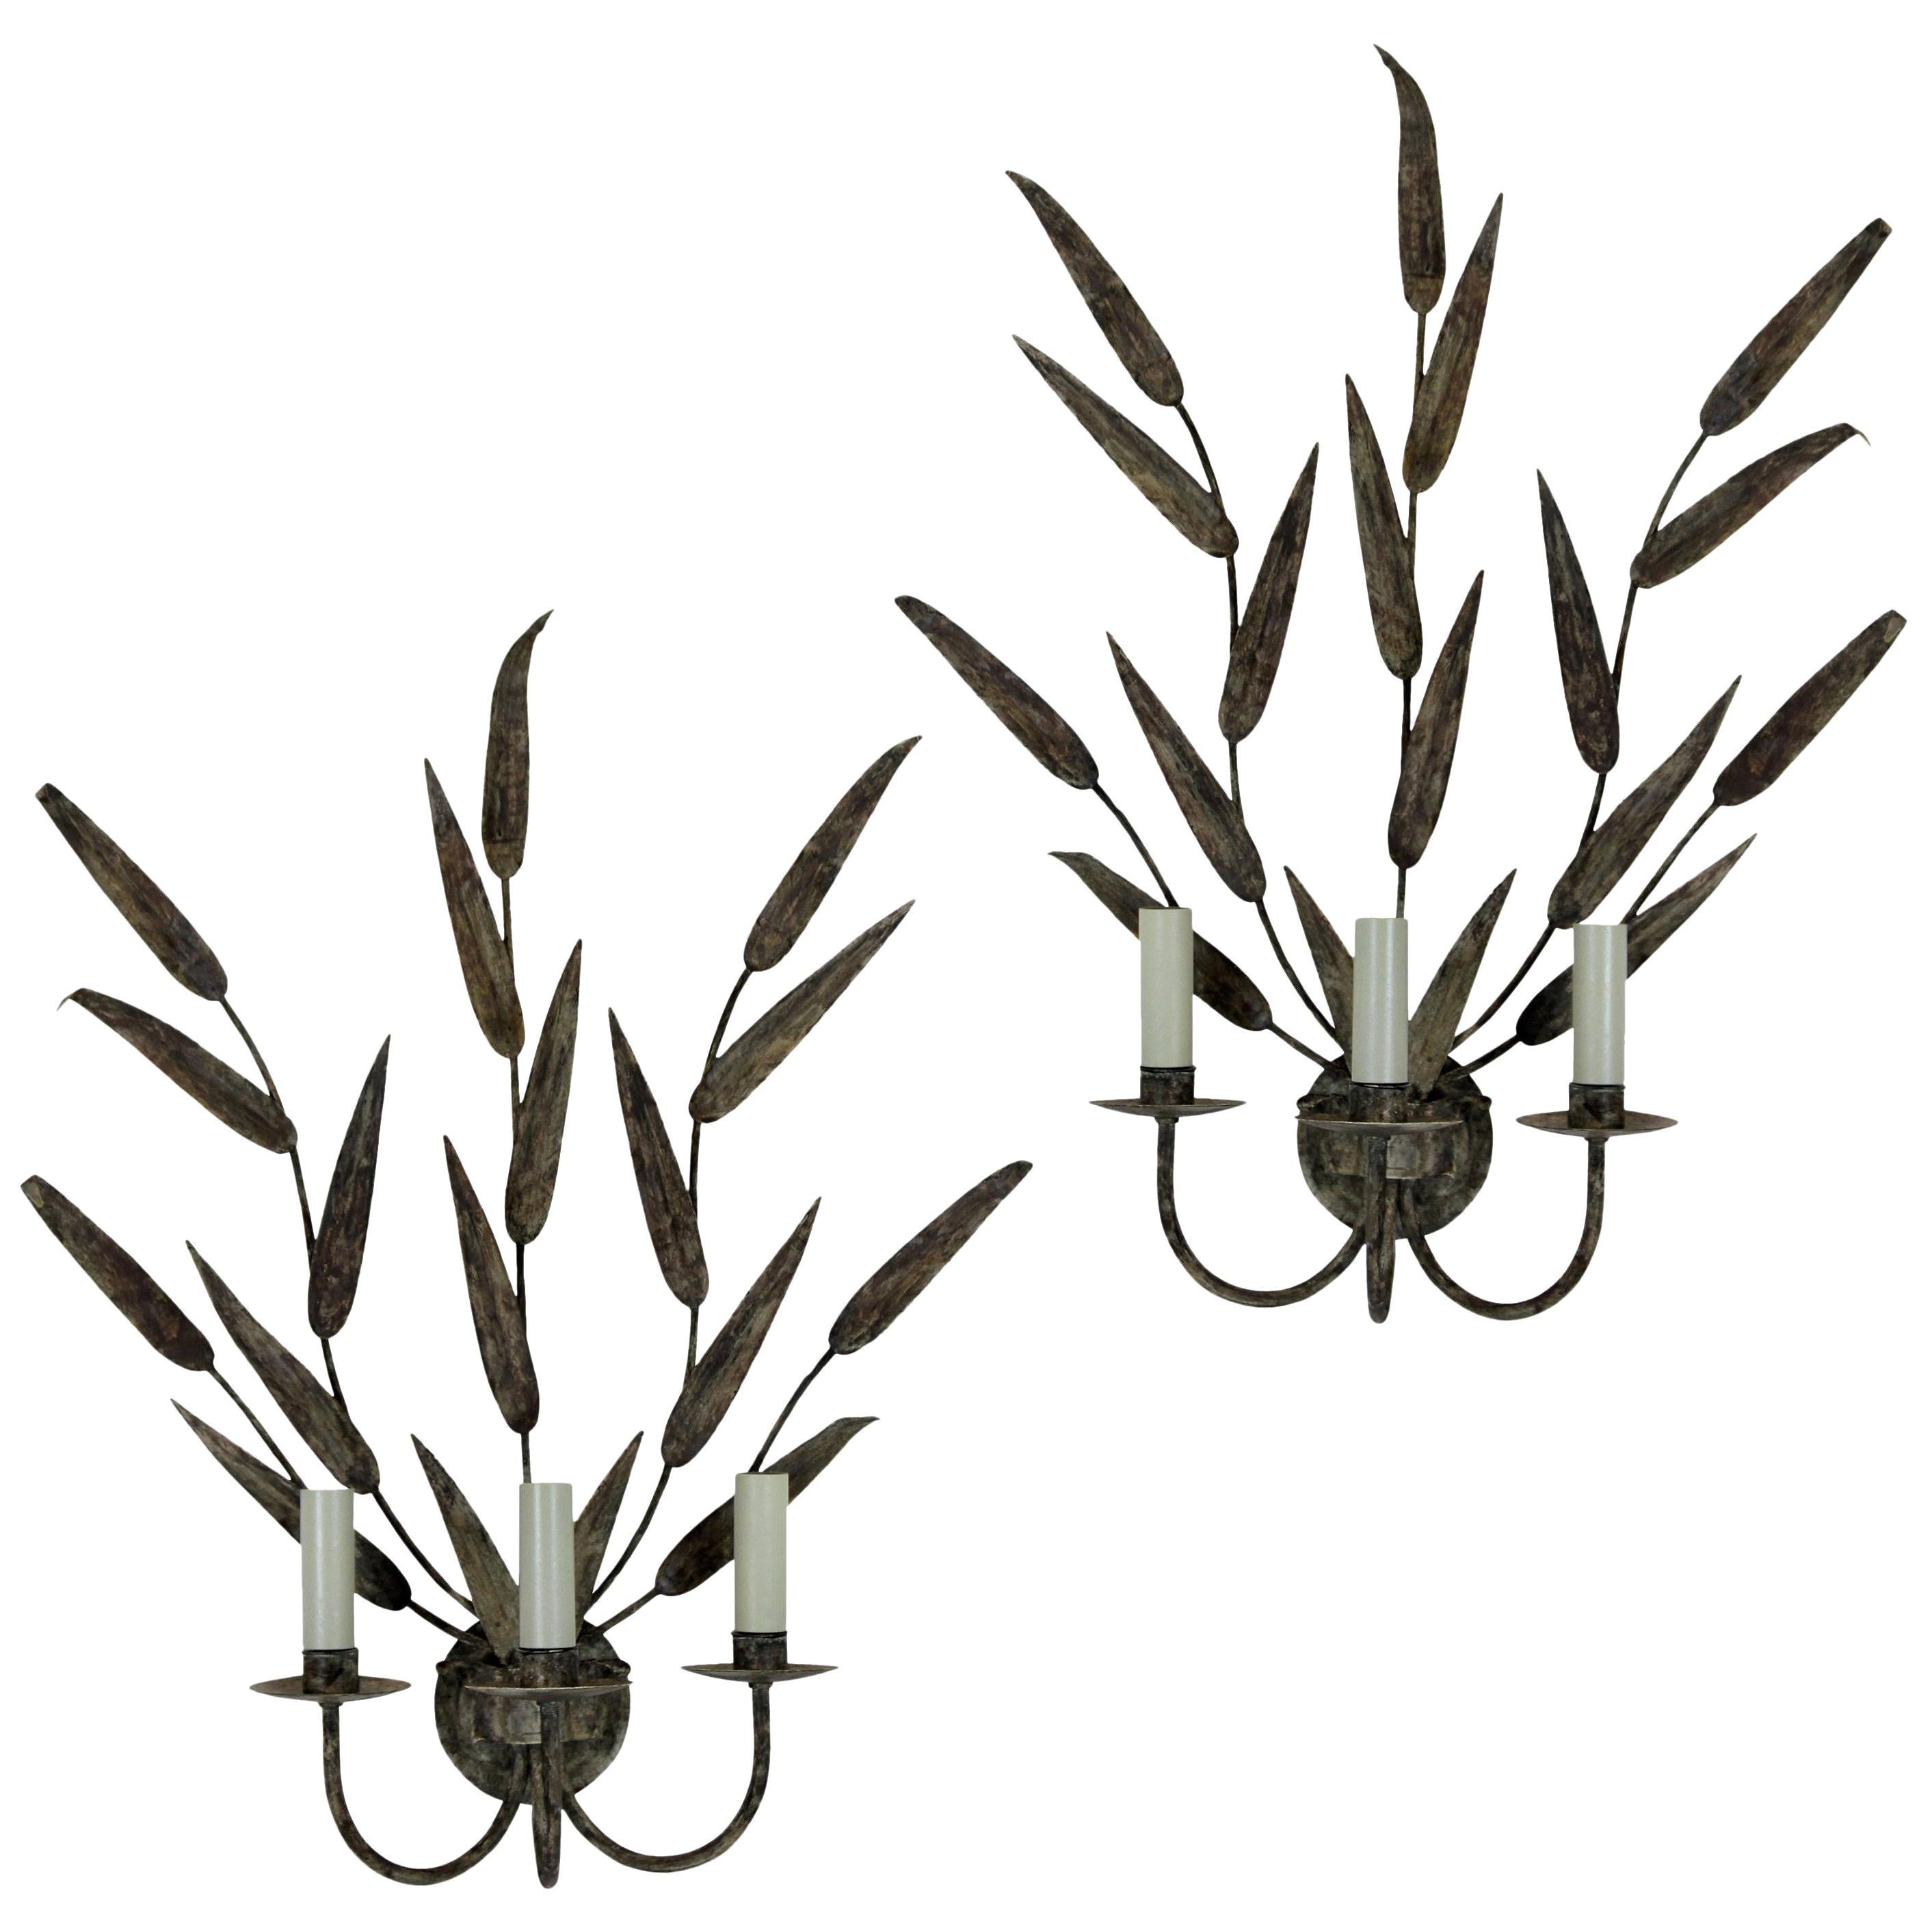 Pair of Large Tole Leaf Wall Sconces